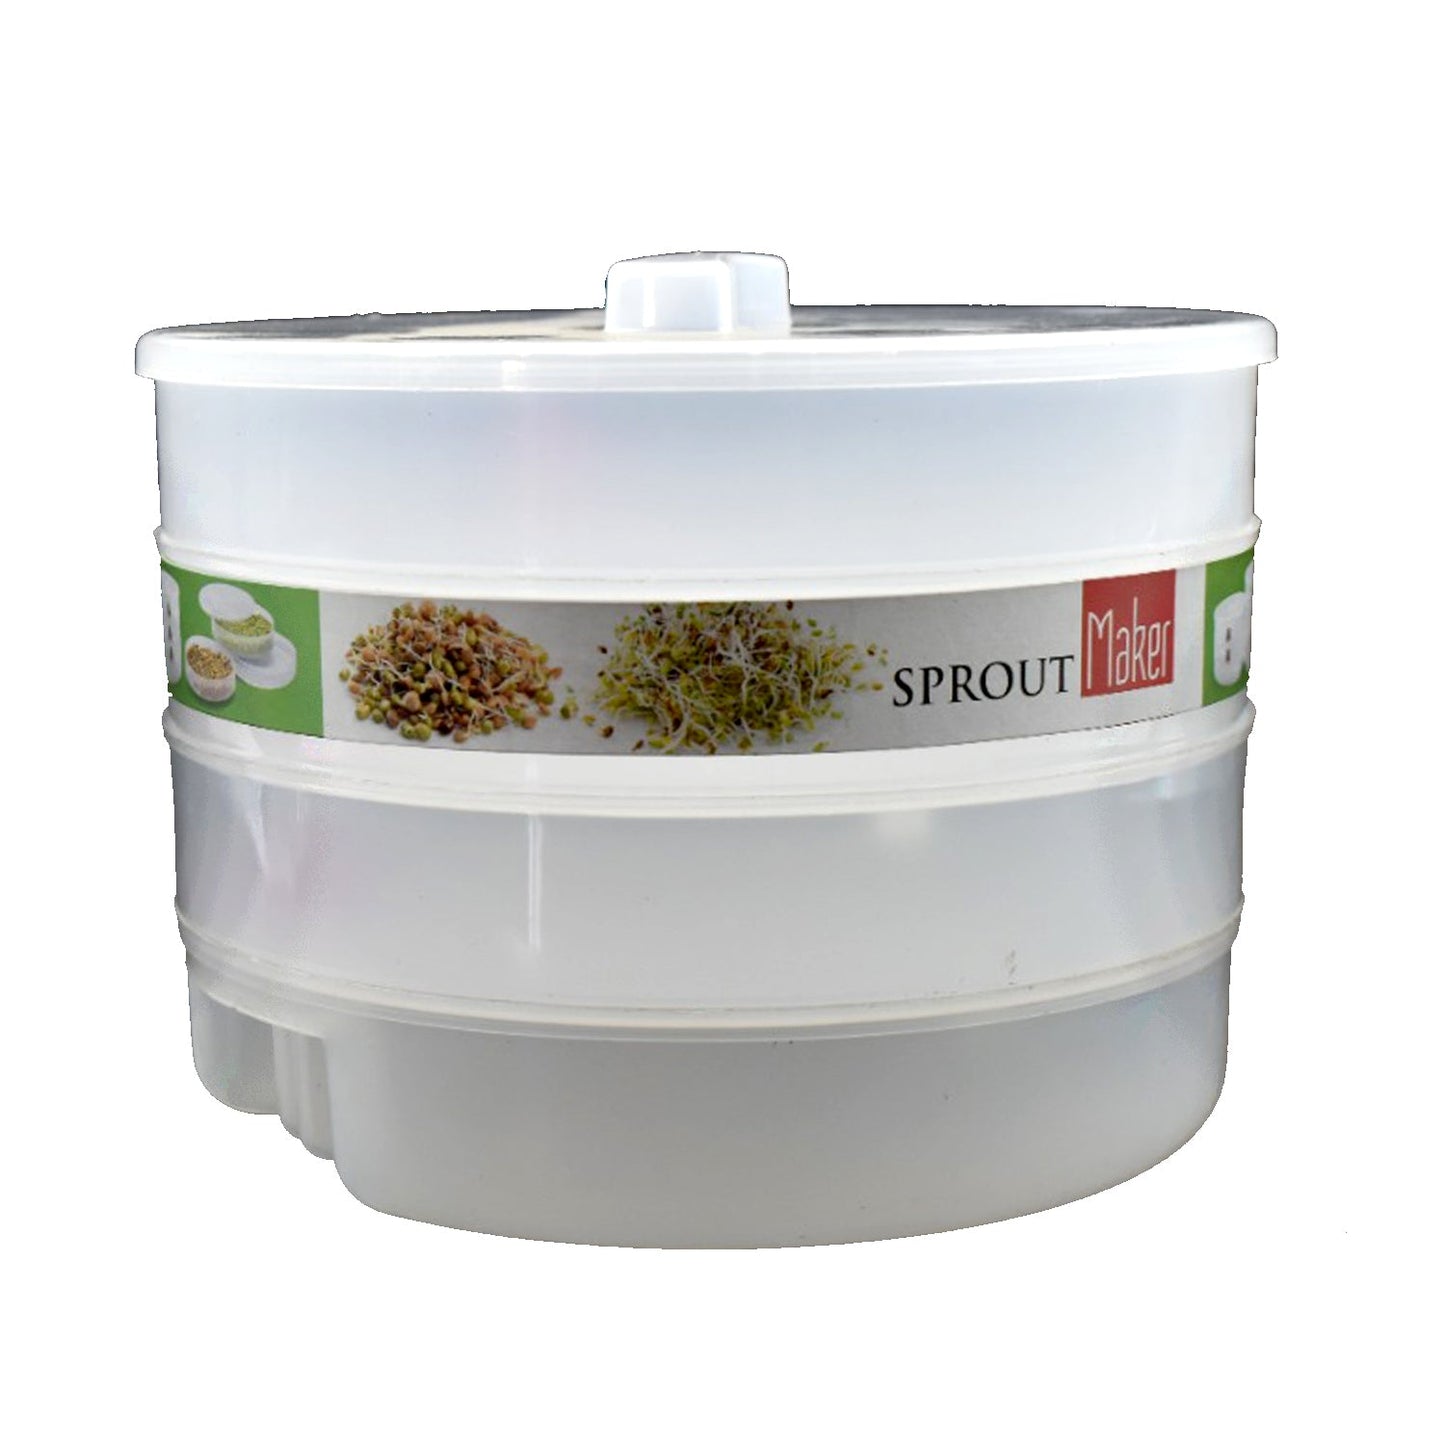 Sprout Maker 4 Layer for making and blending of juices and beverages